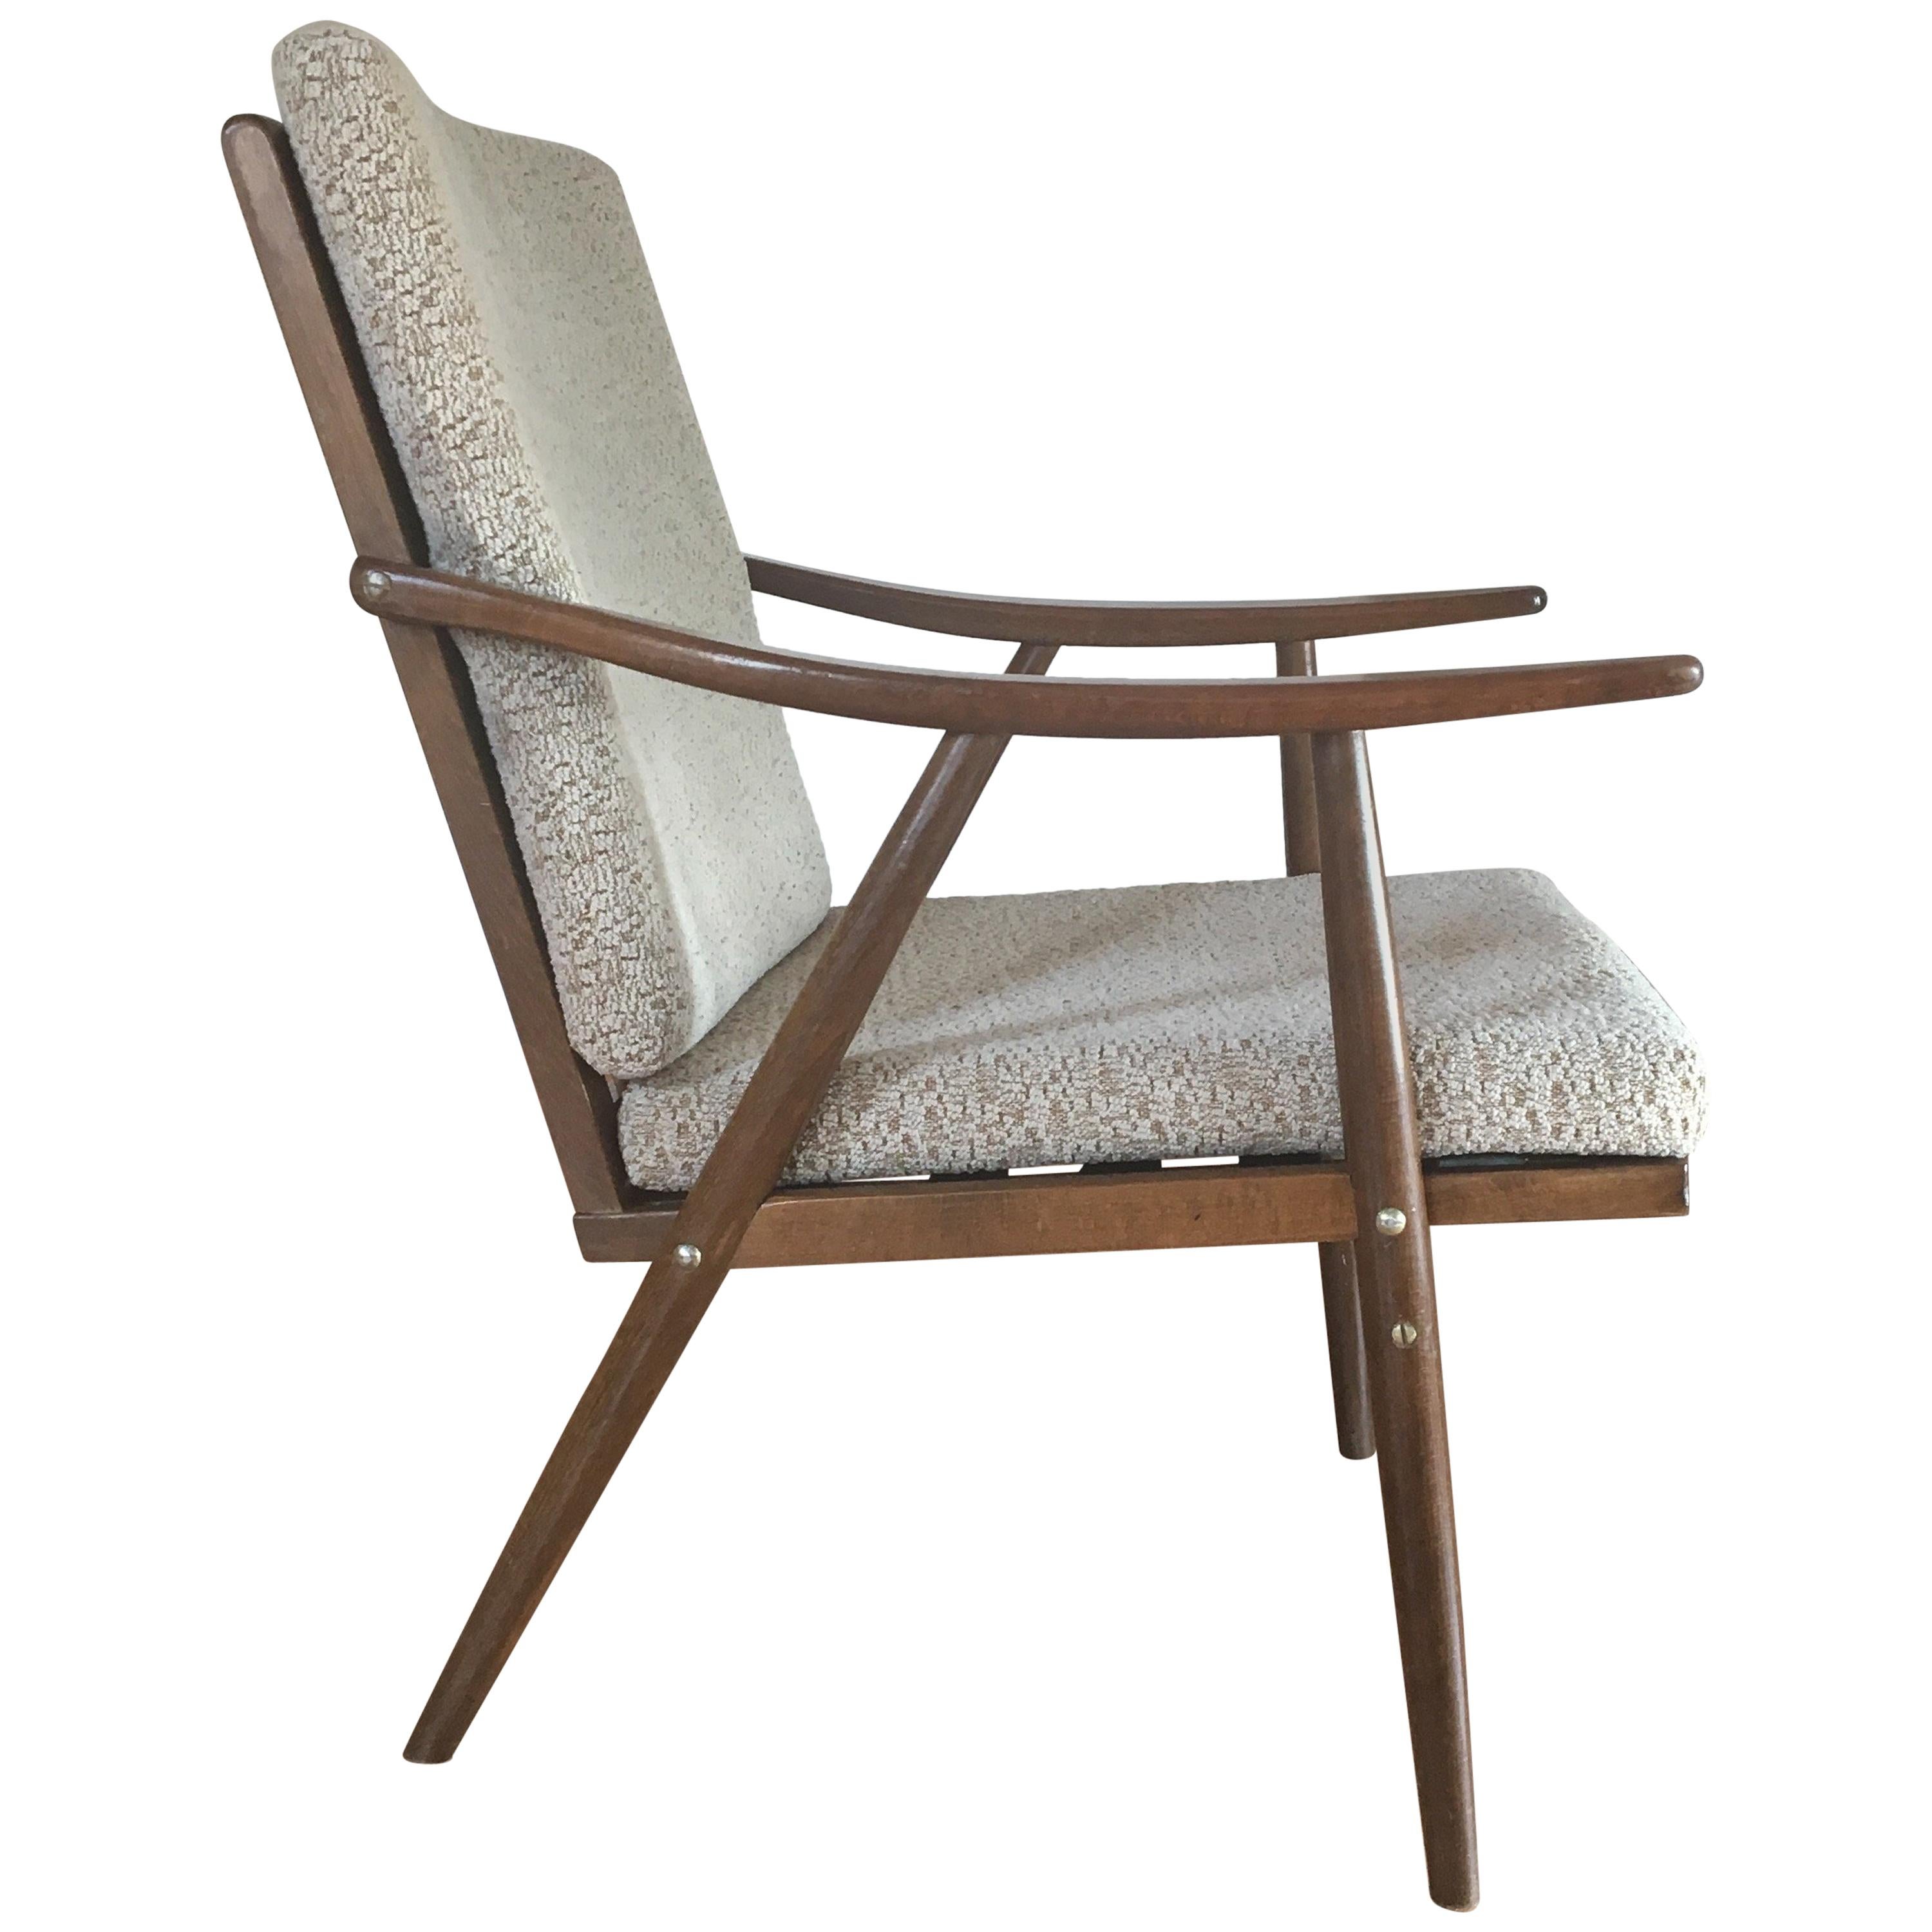 1960s French Armchair from Thonet, Boomerang Chair